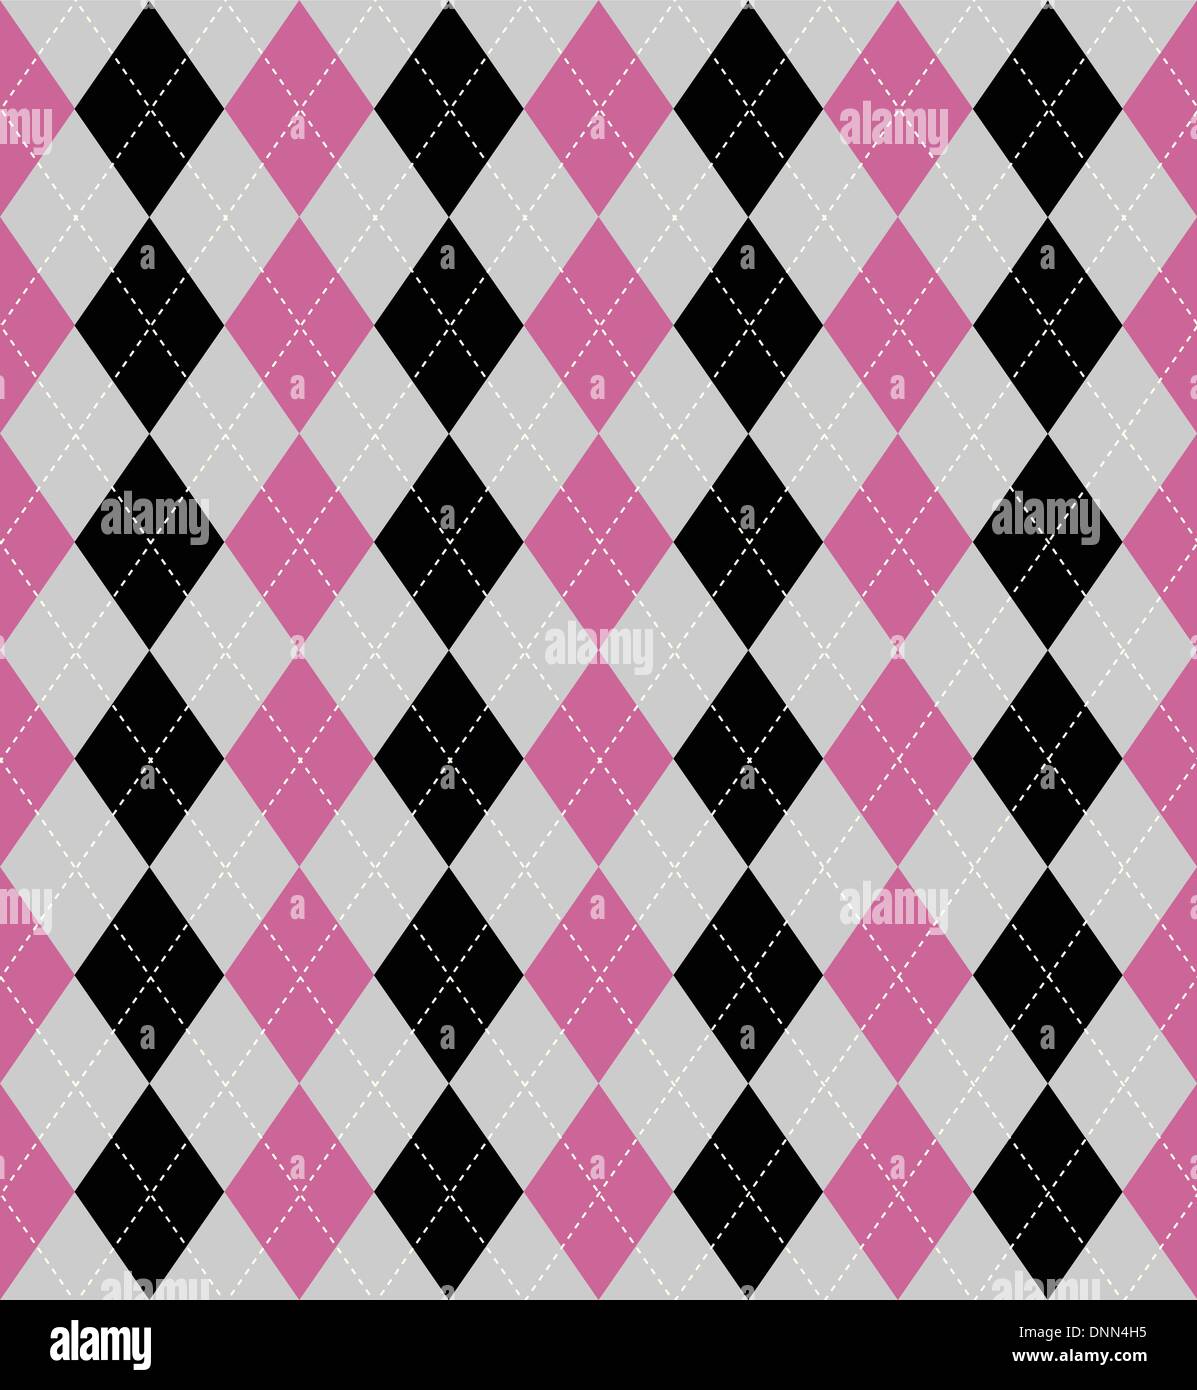 Seamless tiled background of an argyle style pattern Stock Vector